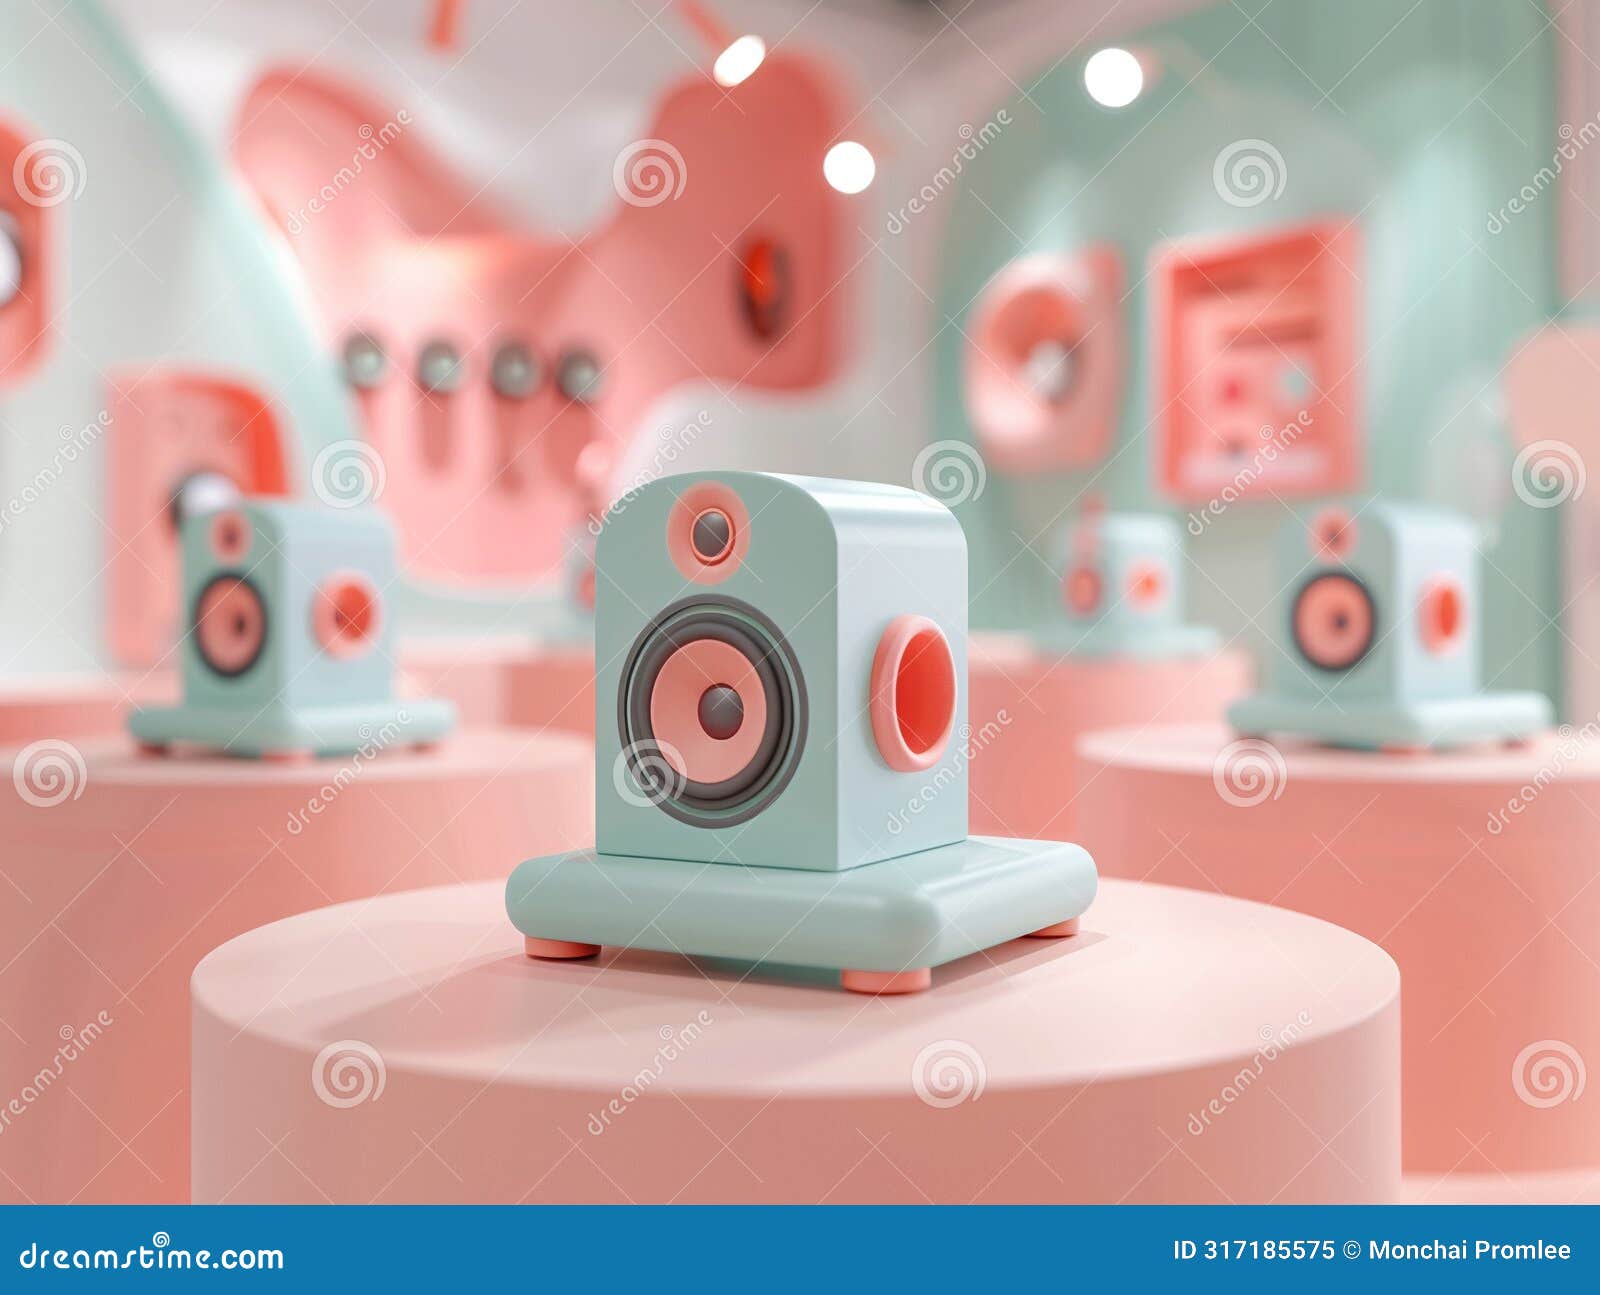 exhibition of high-fidelity sound equipment for networked audio systems